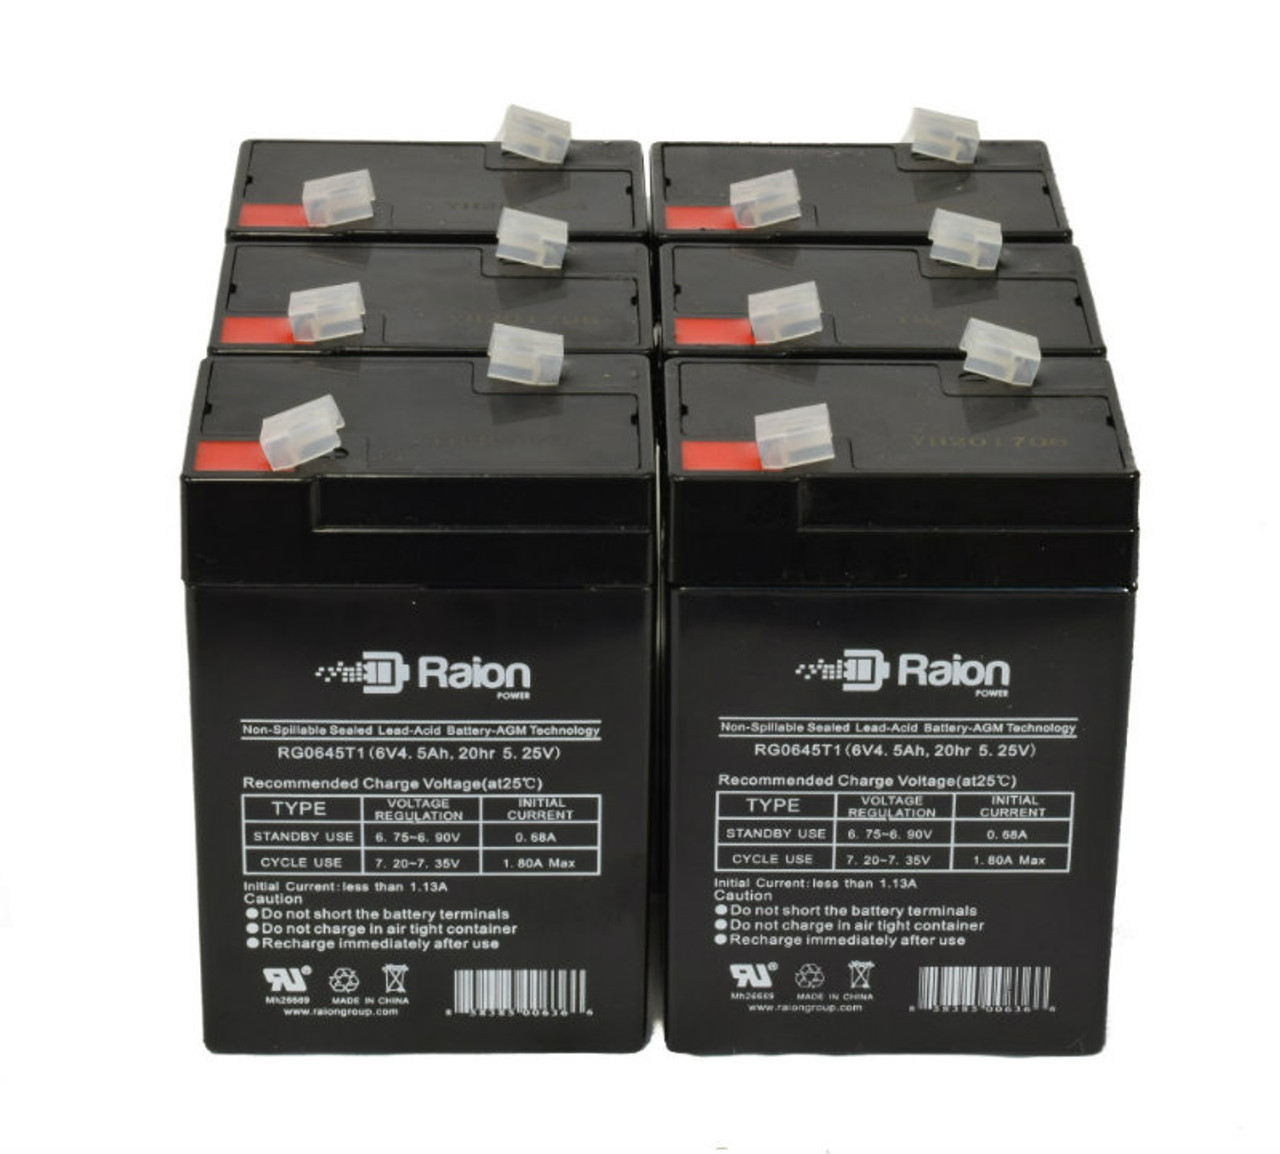 Raion Power 6 Volt 4.5Ah RG0645T1 Replacement Battery for LongWay 3FM5 - 6 Pack